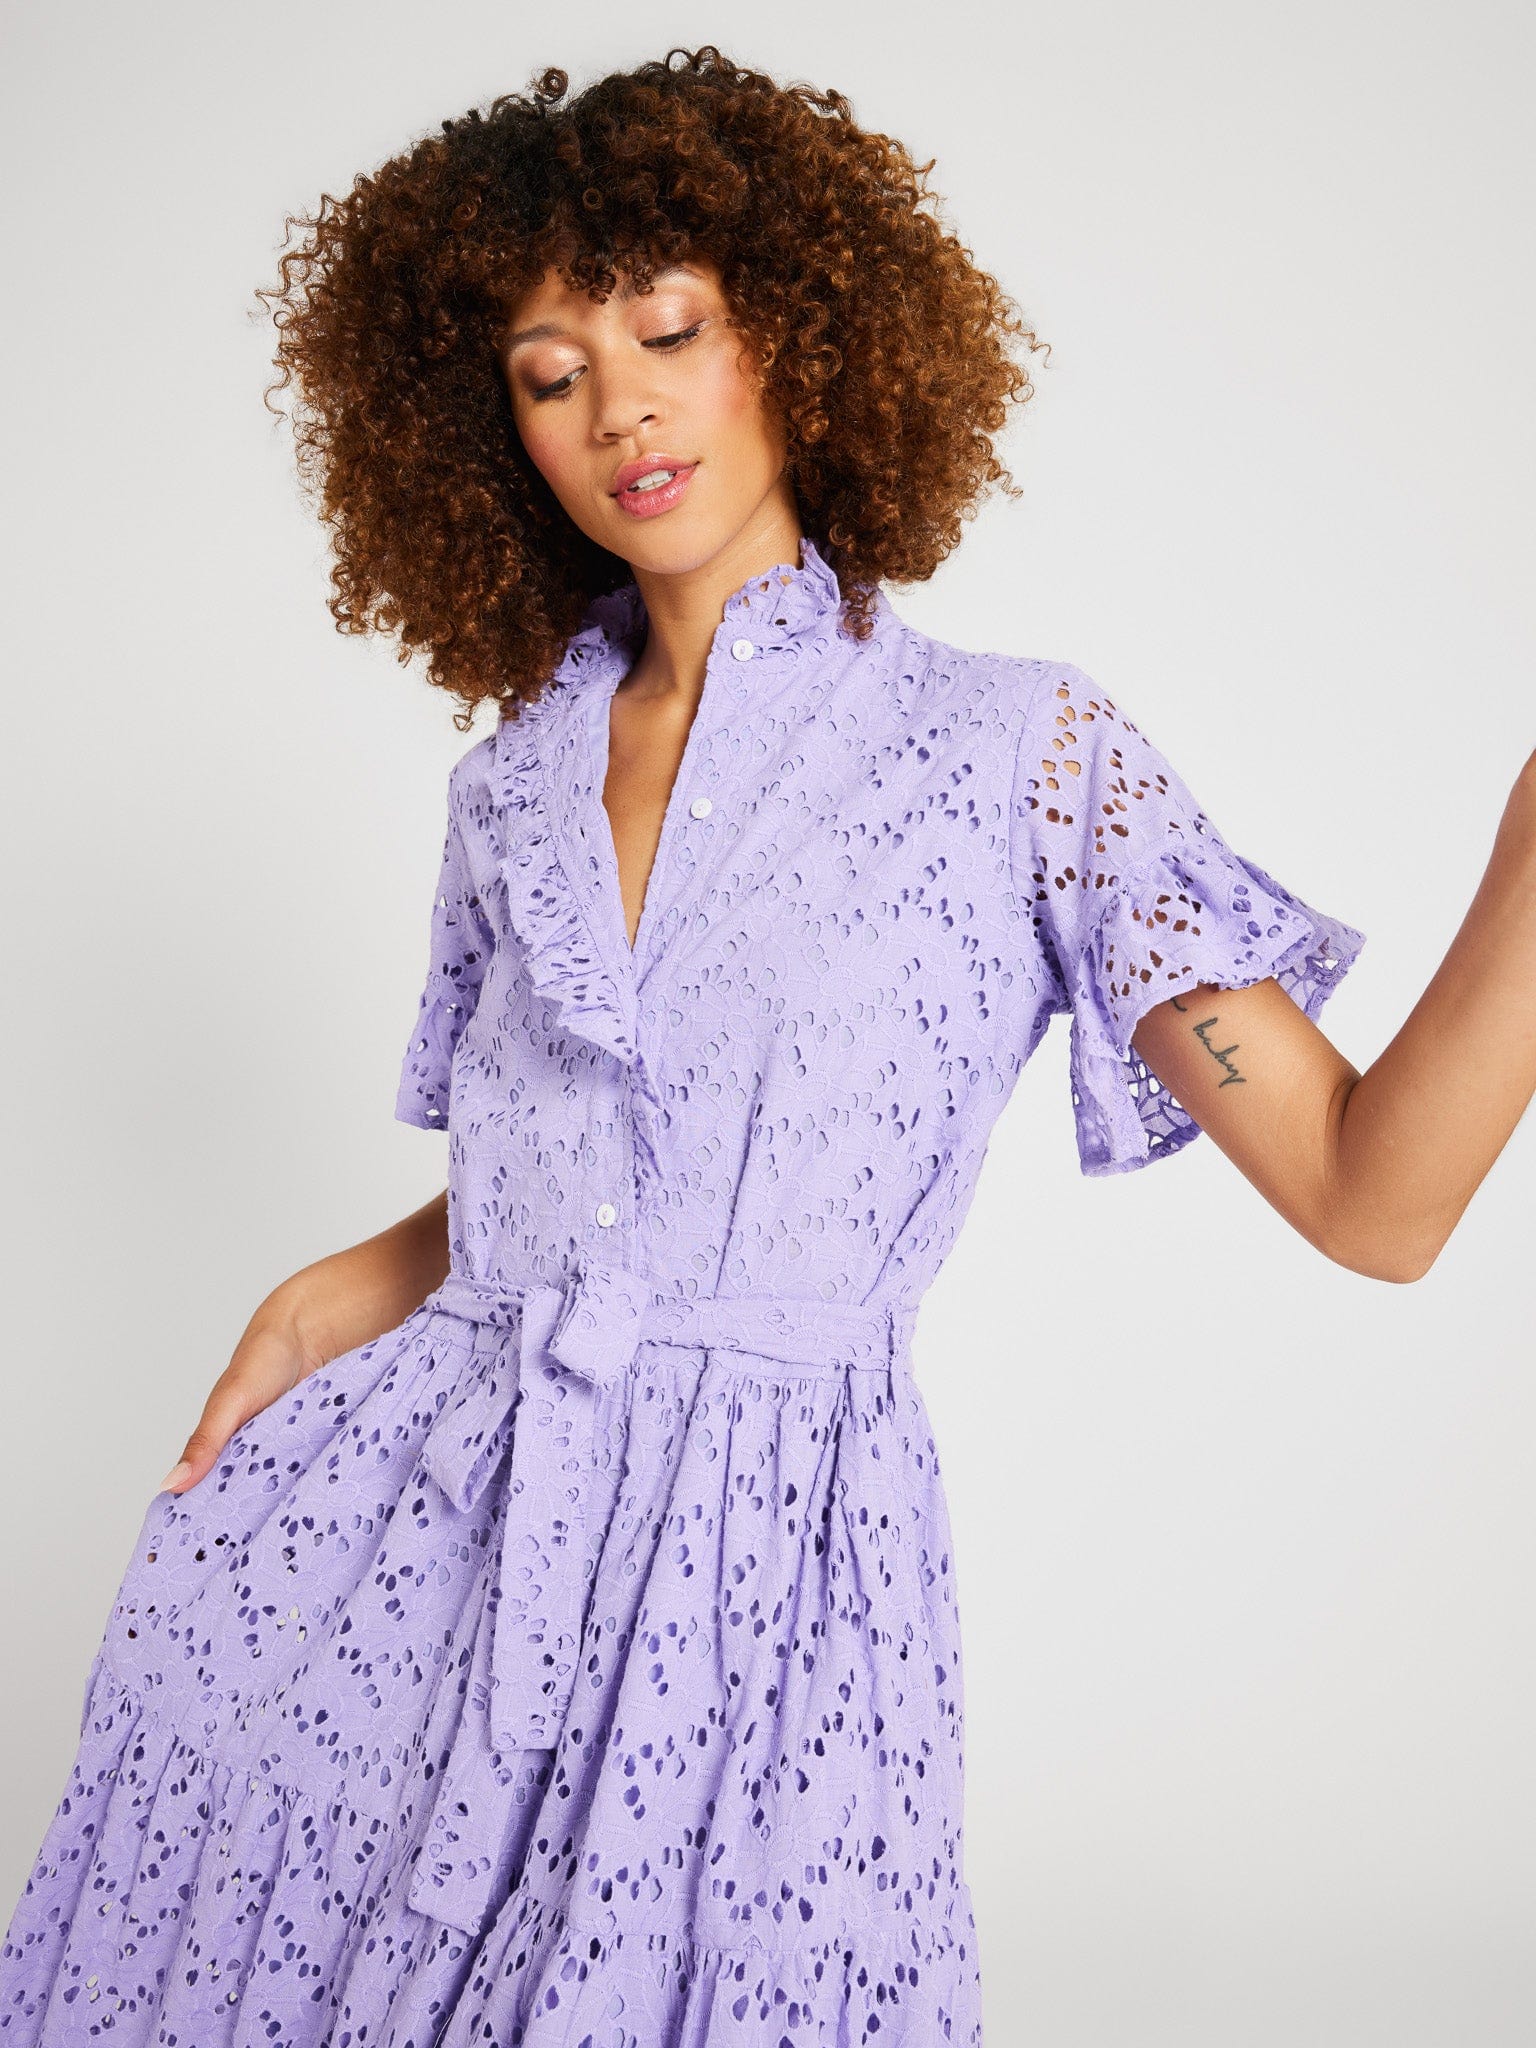 MILLE Clothing Victoria Dress in Taffy Eyelet